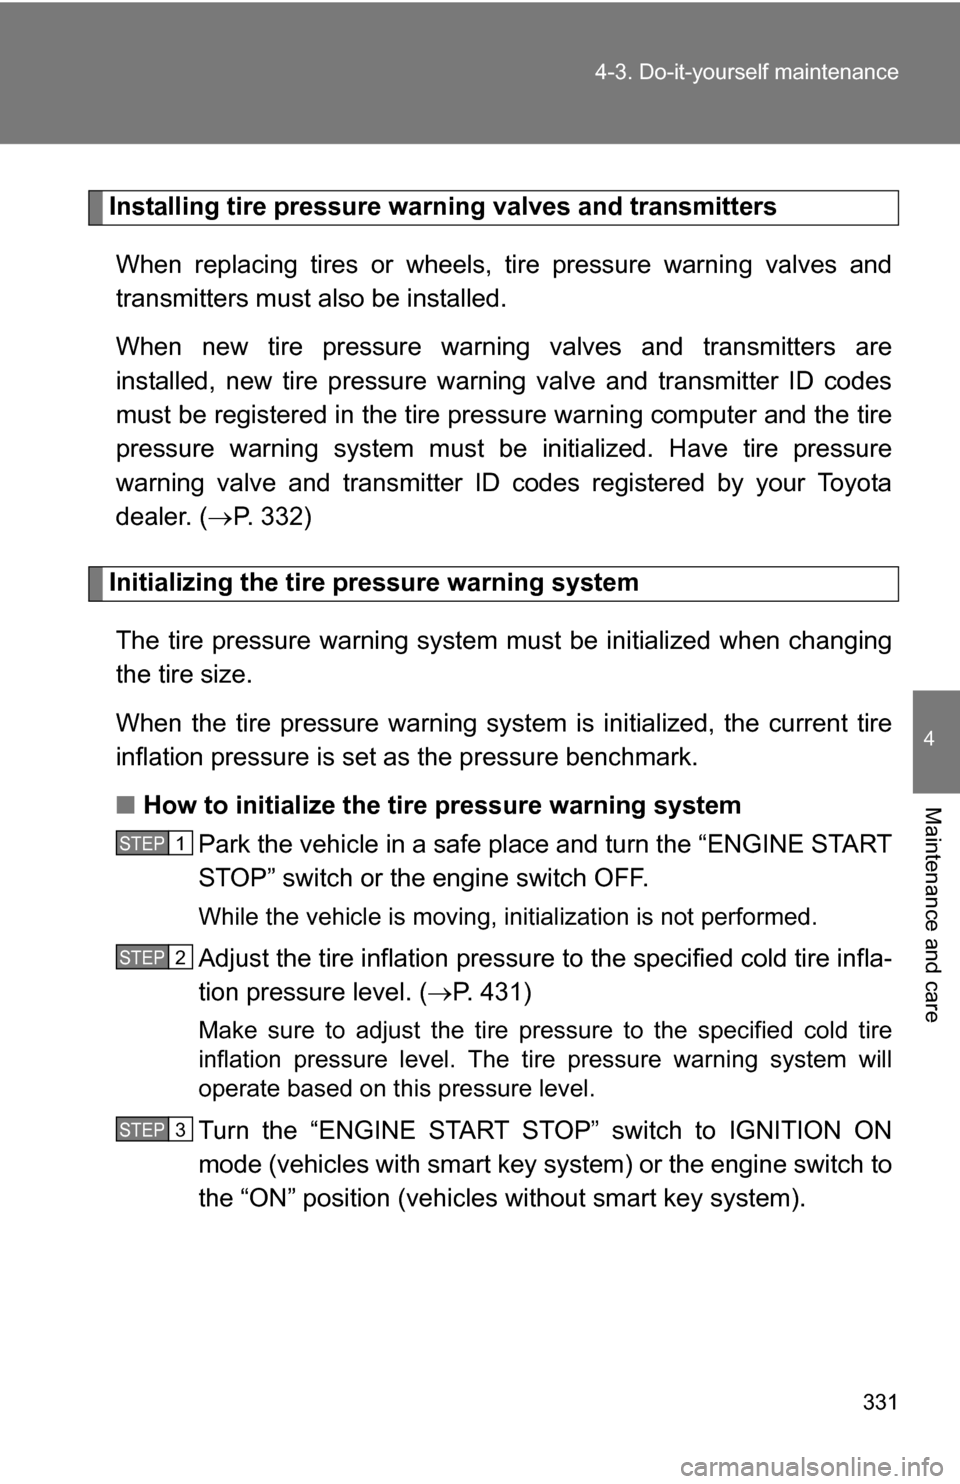 TOYOTA COROLLA 2010 10.G Owners Manual 331
4-3. Do-it-yourself maintenance
4
Maintenance and care
Installing tire pressure warning valves and transmitters
When replacing tires or wheels,  tire pressure warning valves and
transmitters must 